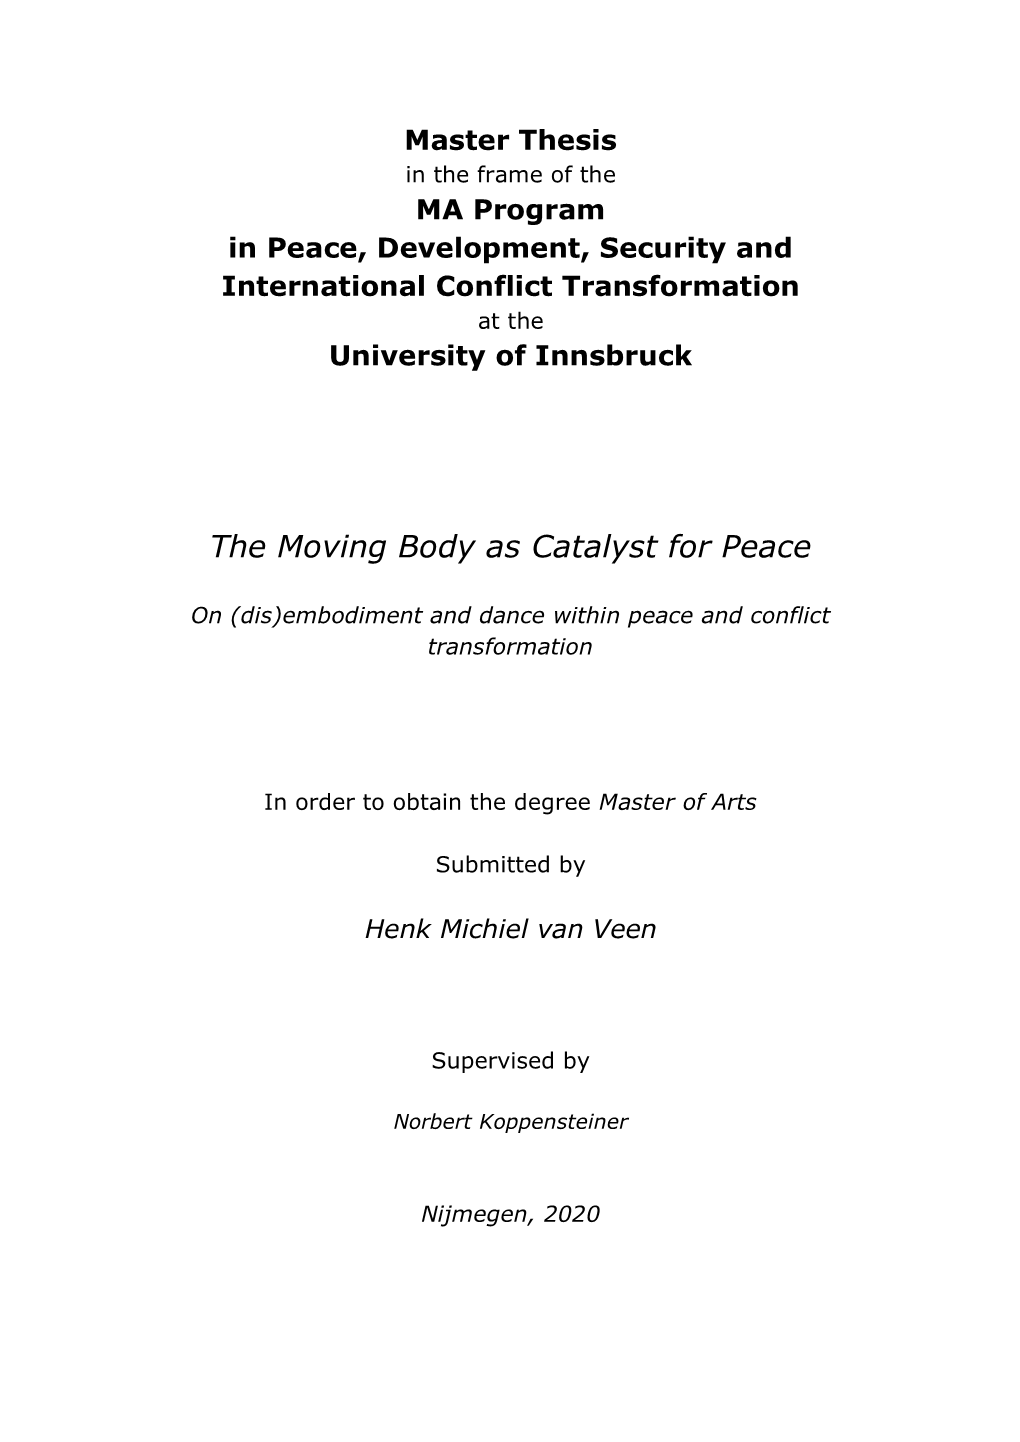 The Moving Body As Catalyst for Peace